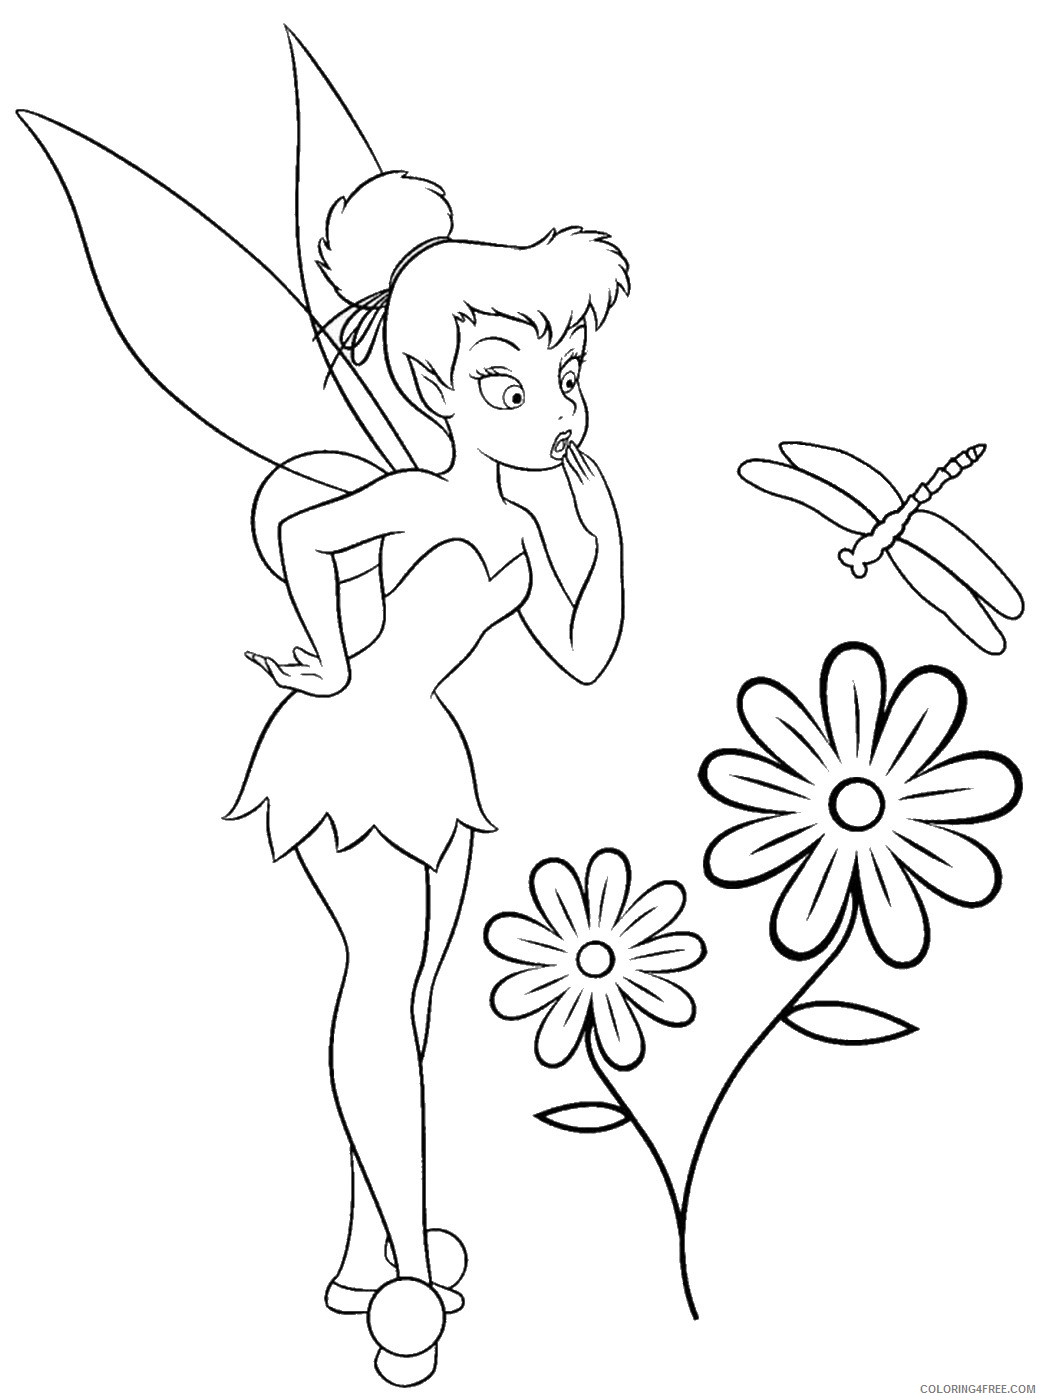 Tinker Bell Coloring Pages Cartoons tinkerbell_cl_46 Printable 2020 6647 Coloring4free